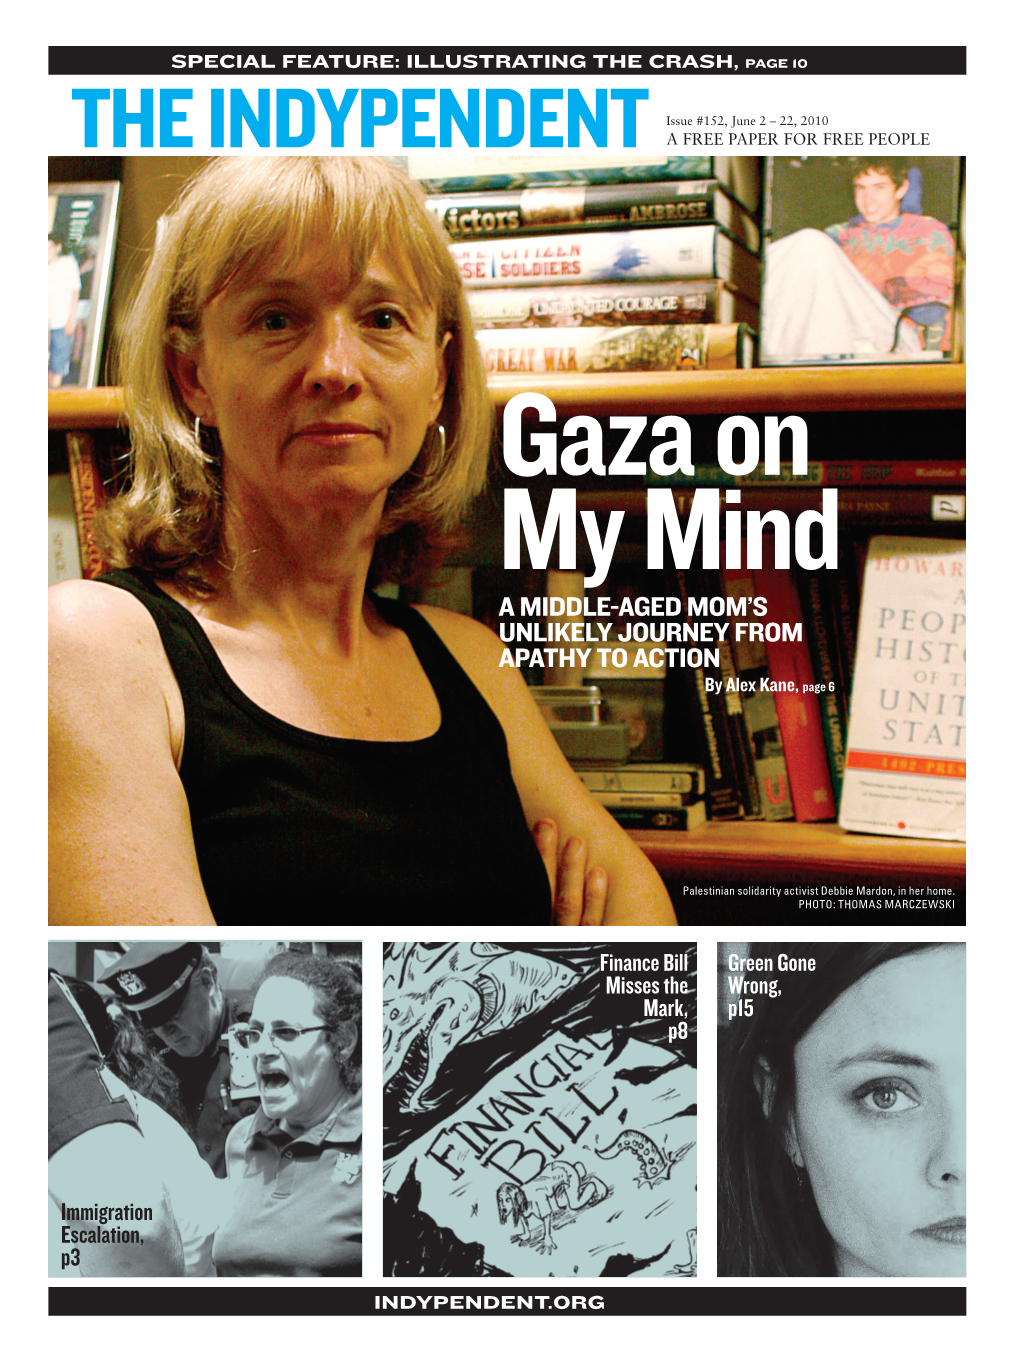 Gaza on My Mind: a Middle-Aged Mom's Unlikely Journey From